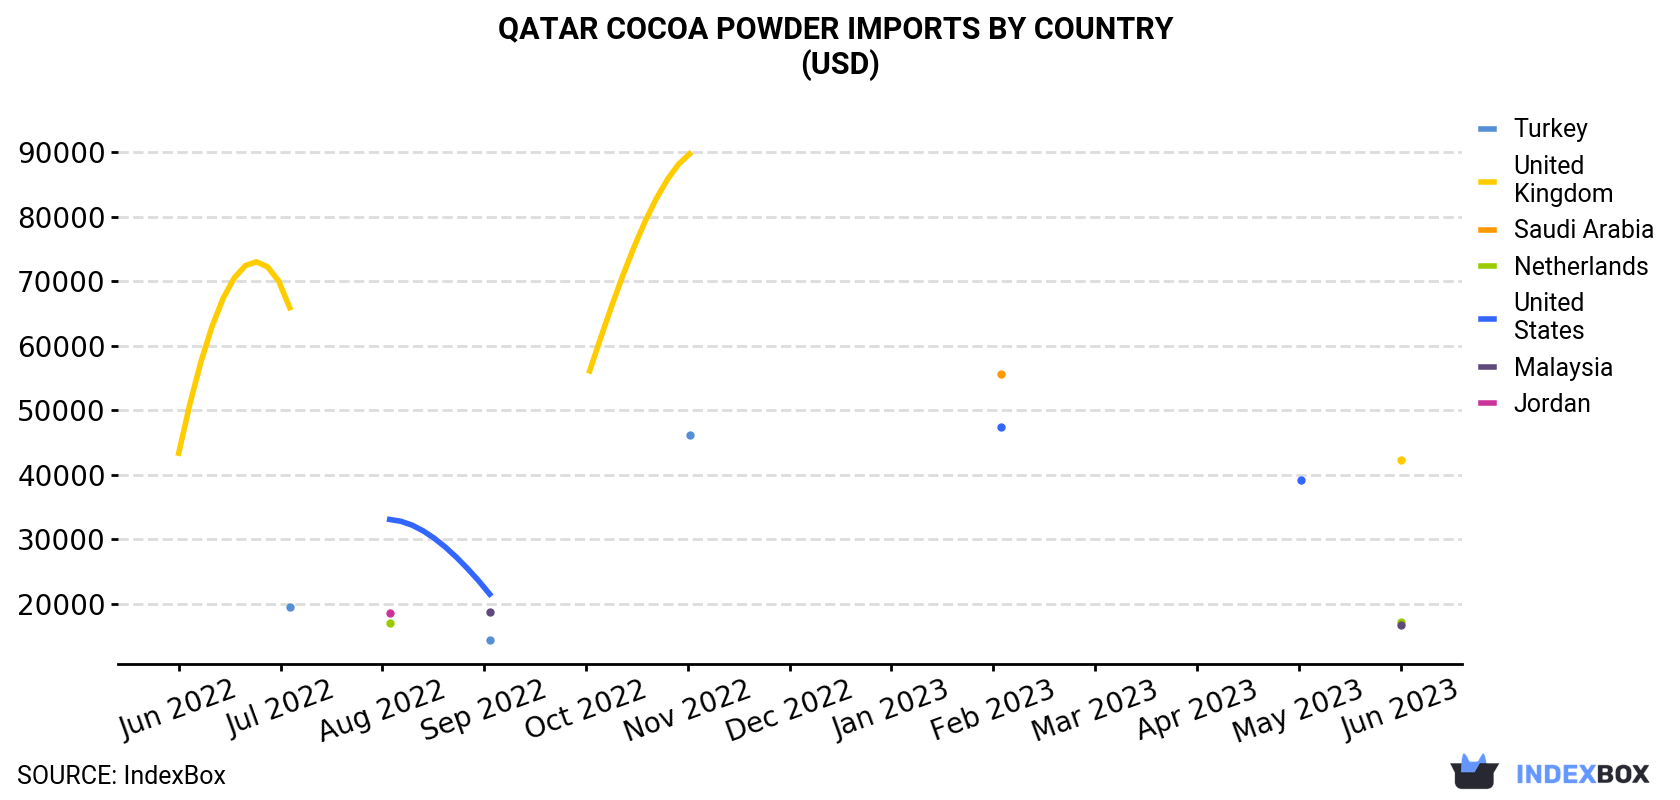 Qatar Cocoa Powder Imports By Country (USD)